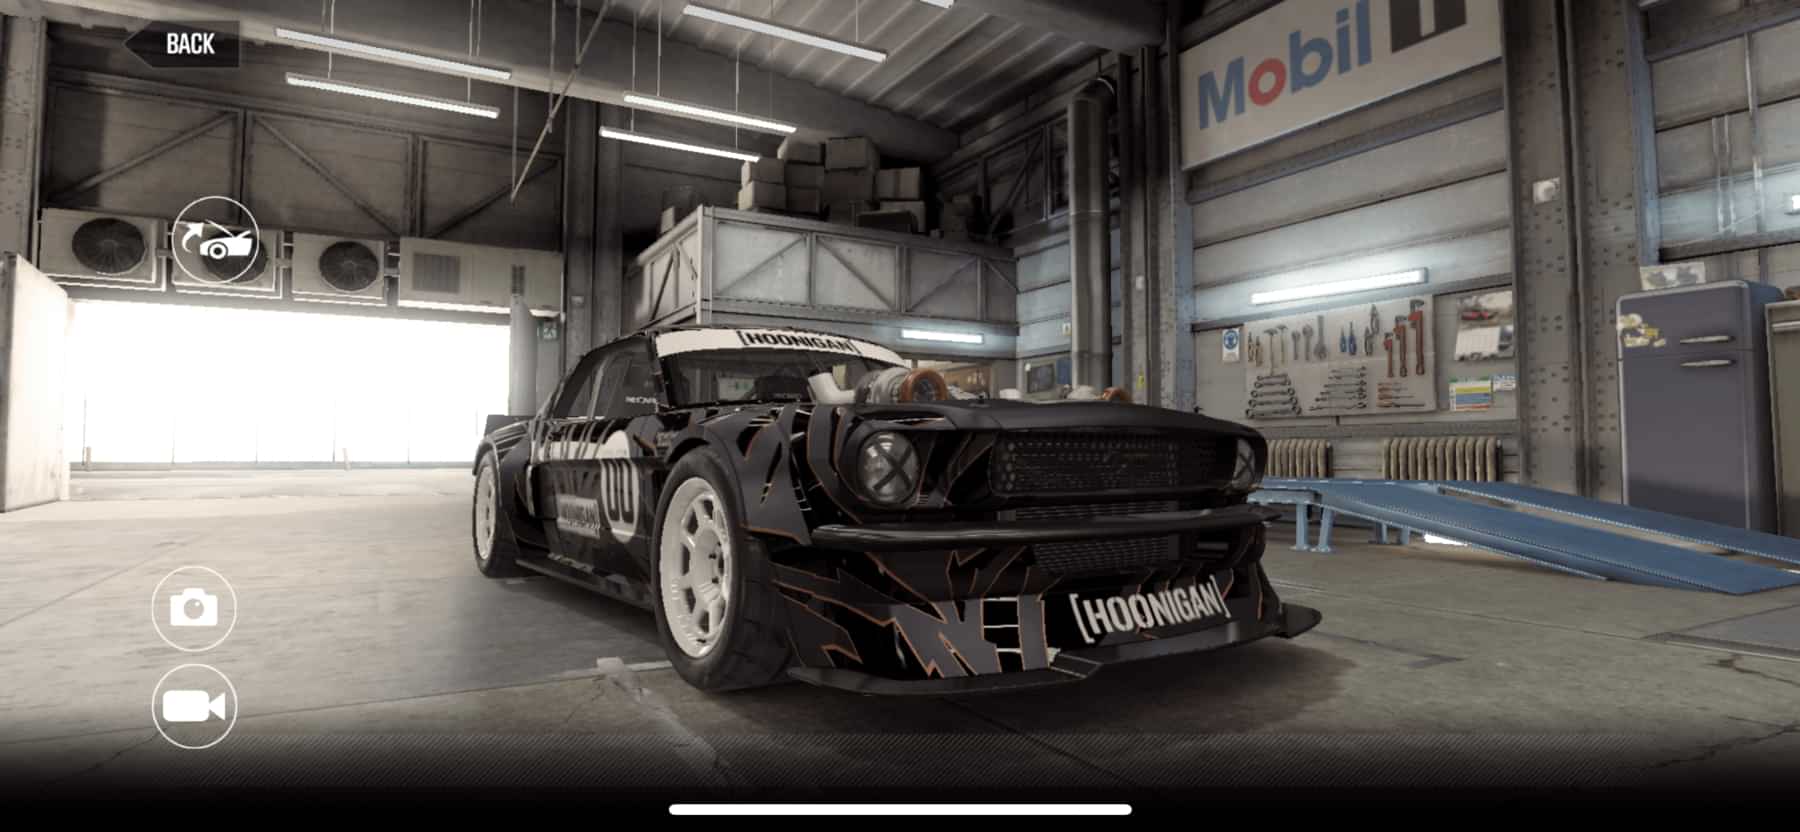 Ford Mustang RTR Hoonicorn V2 CSR2, best tune and shift pattern